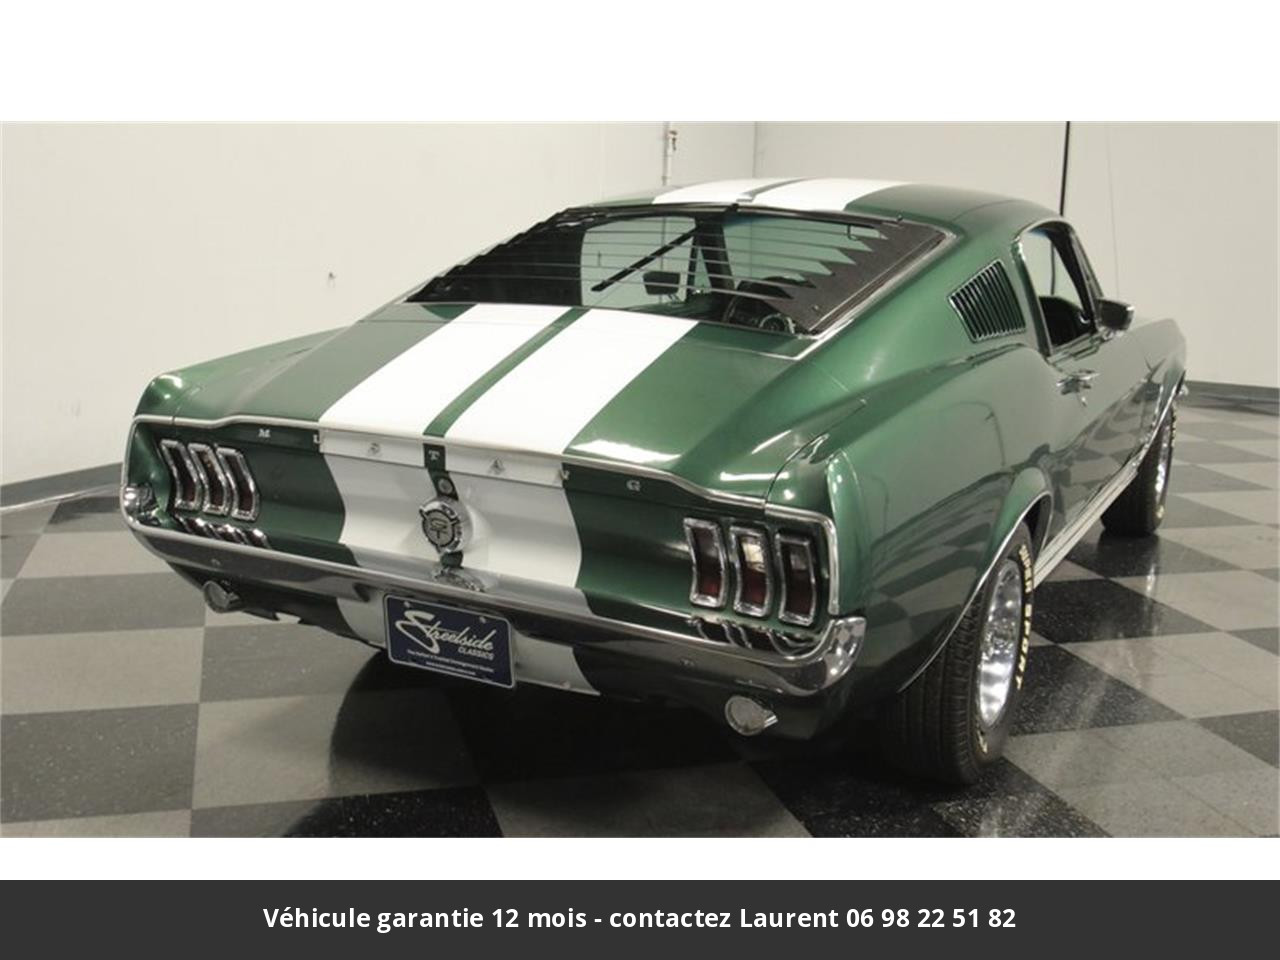 Ford Mustang Fastback 1967 prix tout compris